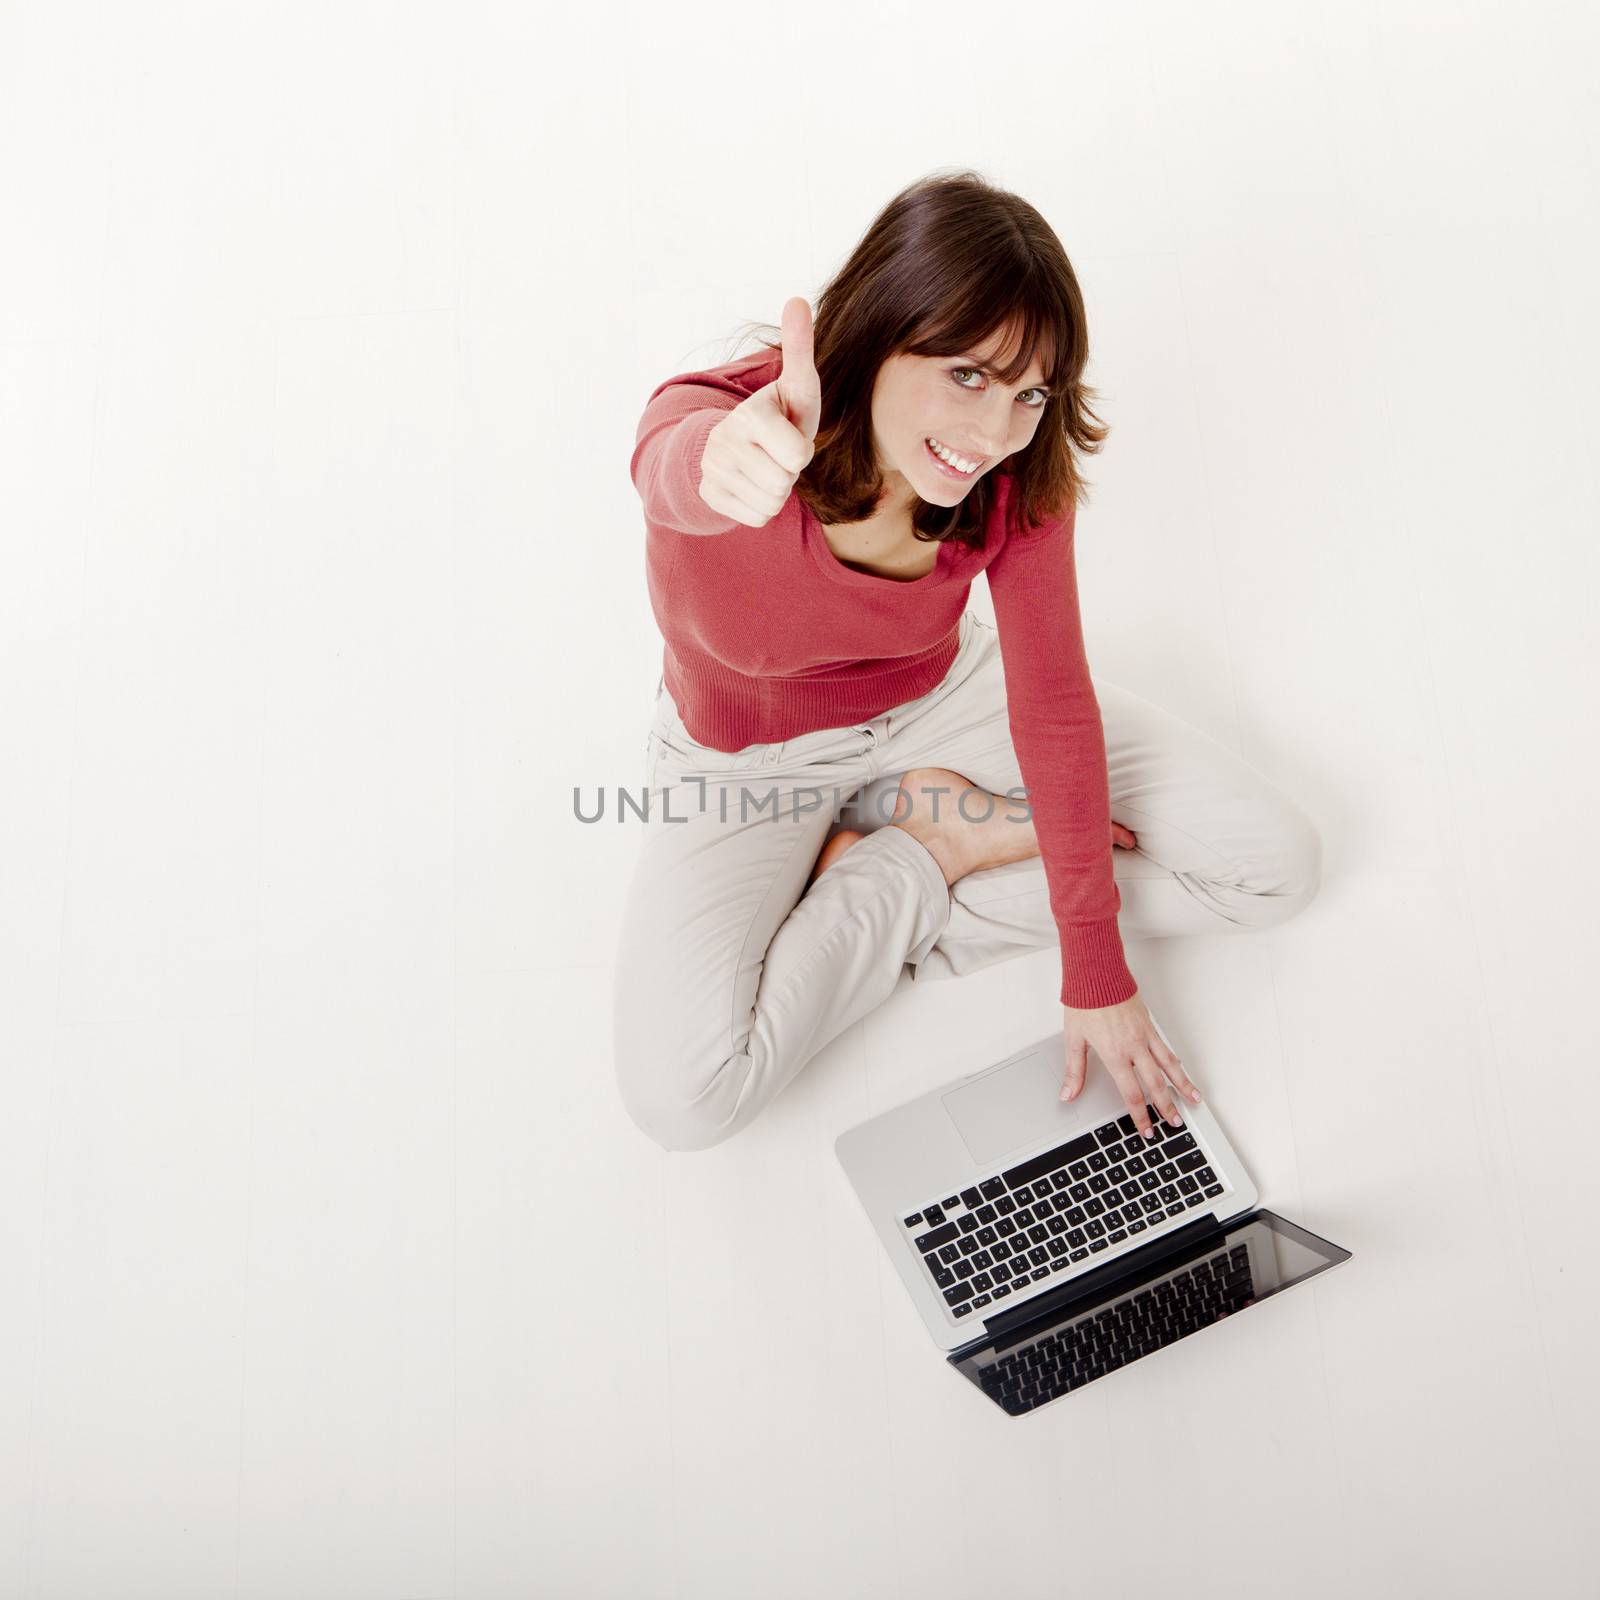 Beautiful happy woman sitting on the floor showing thumbs up, with a laptop